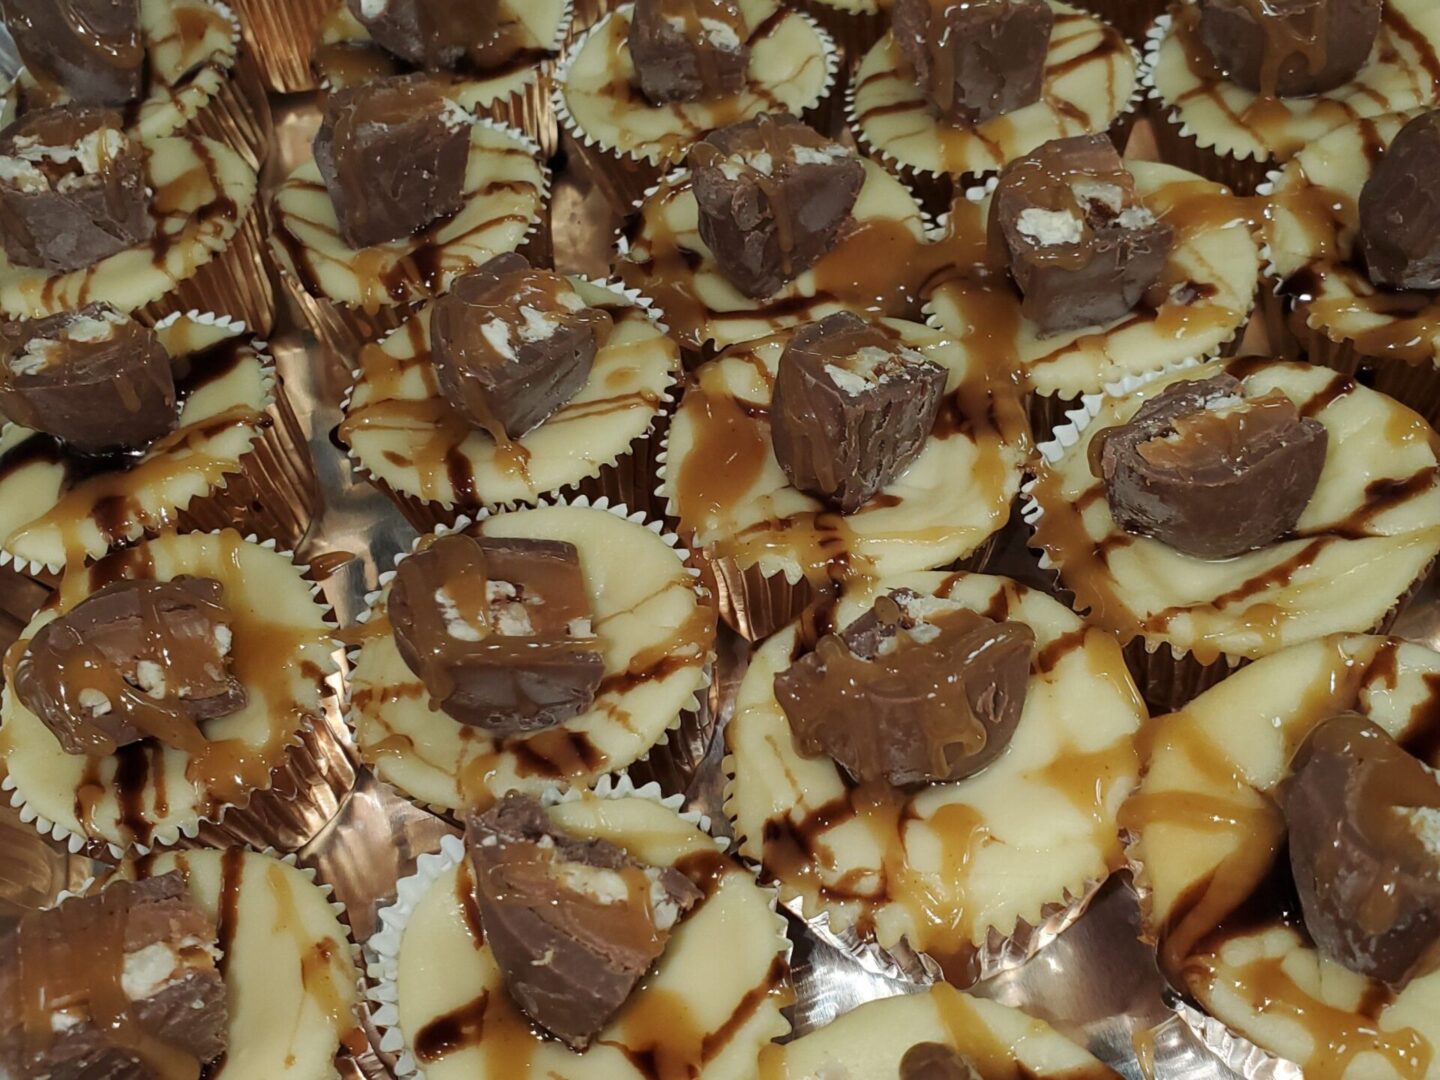 A close up of some chocolate cups